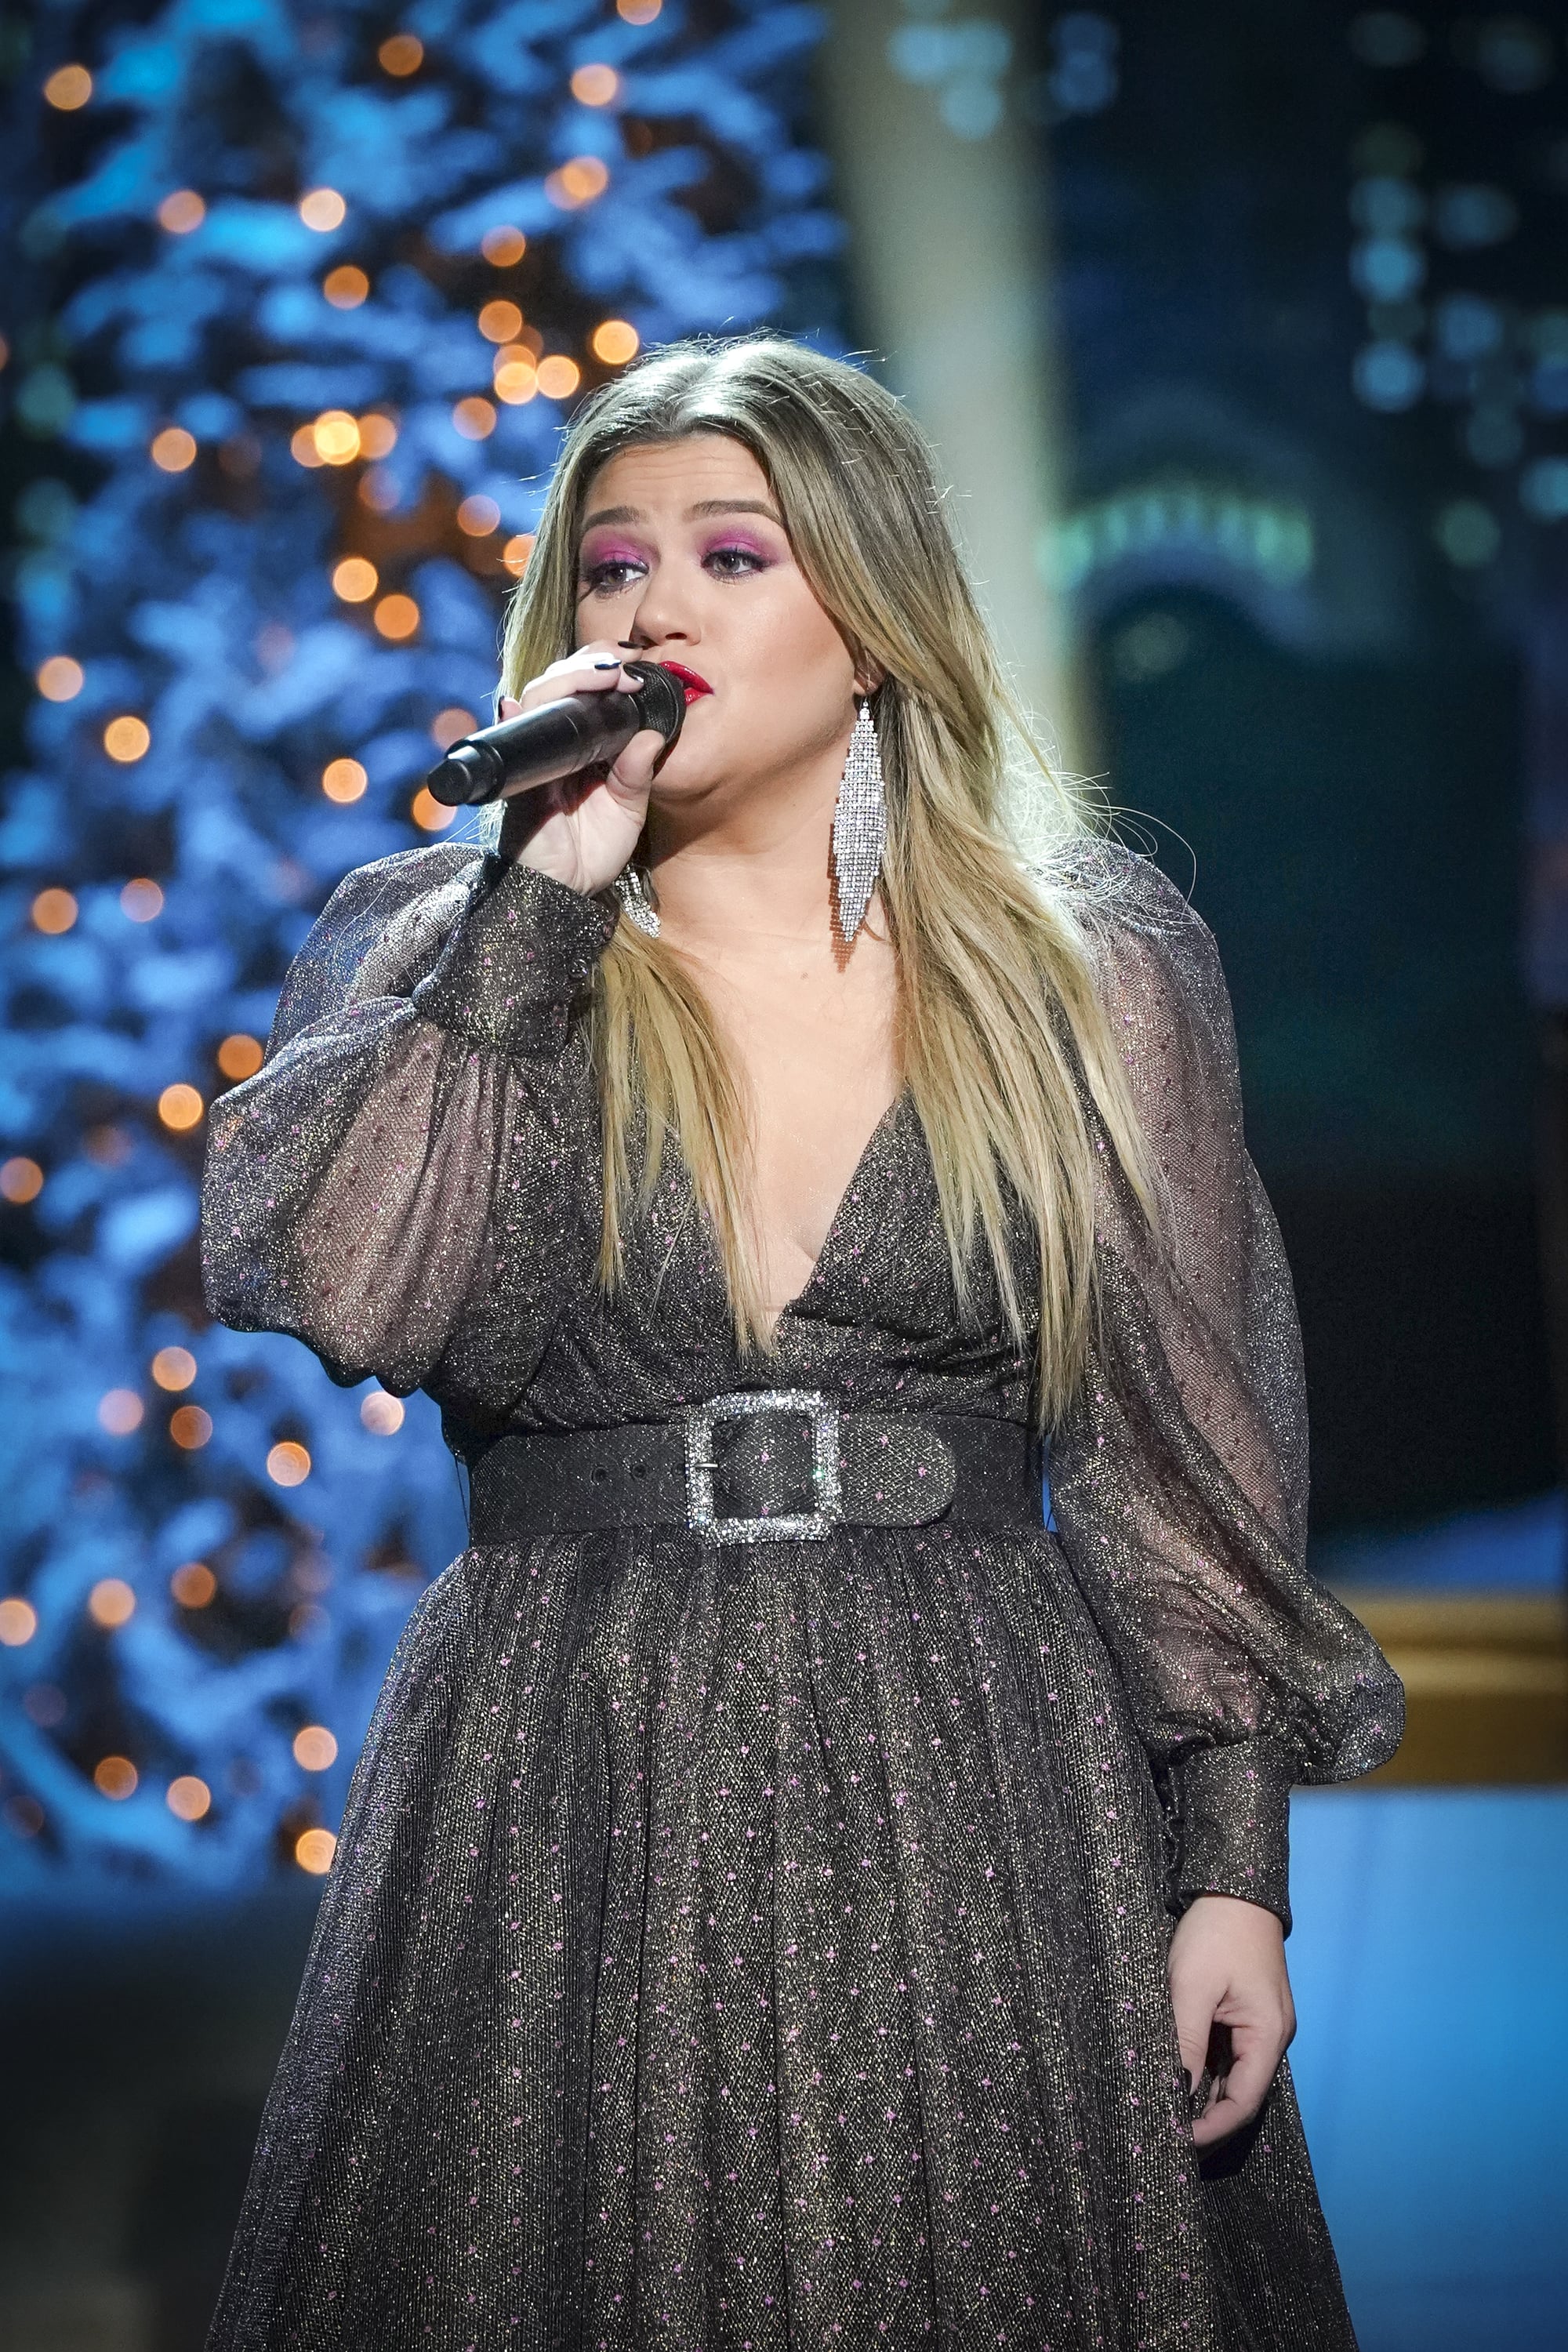 THE TONIGHT SHOW STARRING JIMMY FALLON -- Episode 1373A -- Pictured: Musical guests Kelly Clarkson & Brett Eldredge (not pictured) perform -- (Photo By: Chris Haston/NBC/NBCU Photo Bank via Getty Images)